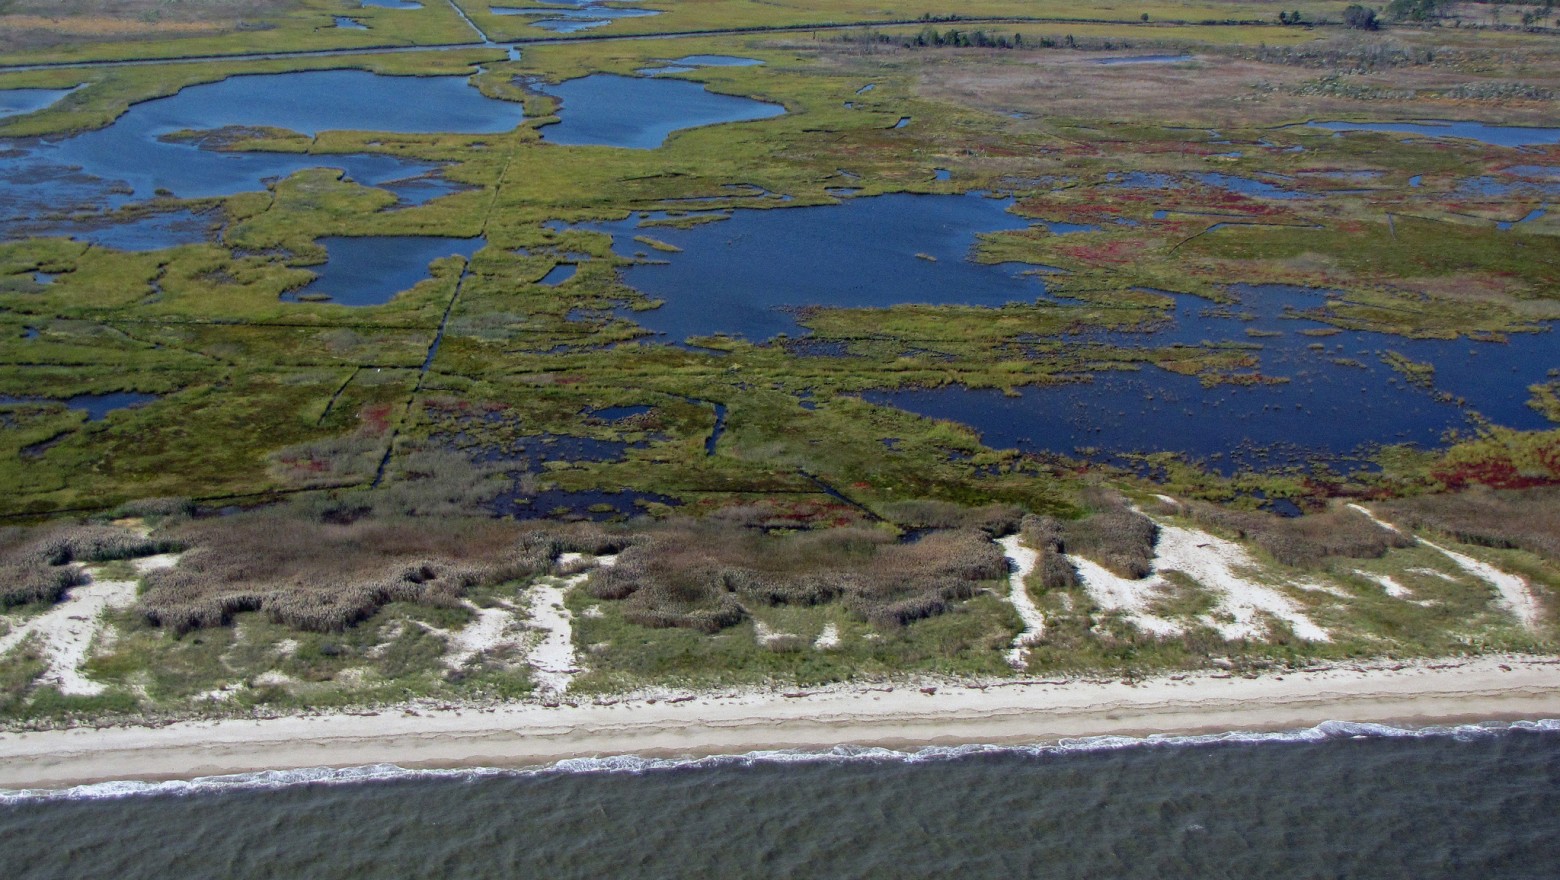 How can we defend Delaware Bay’s ecosystem?